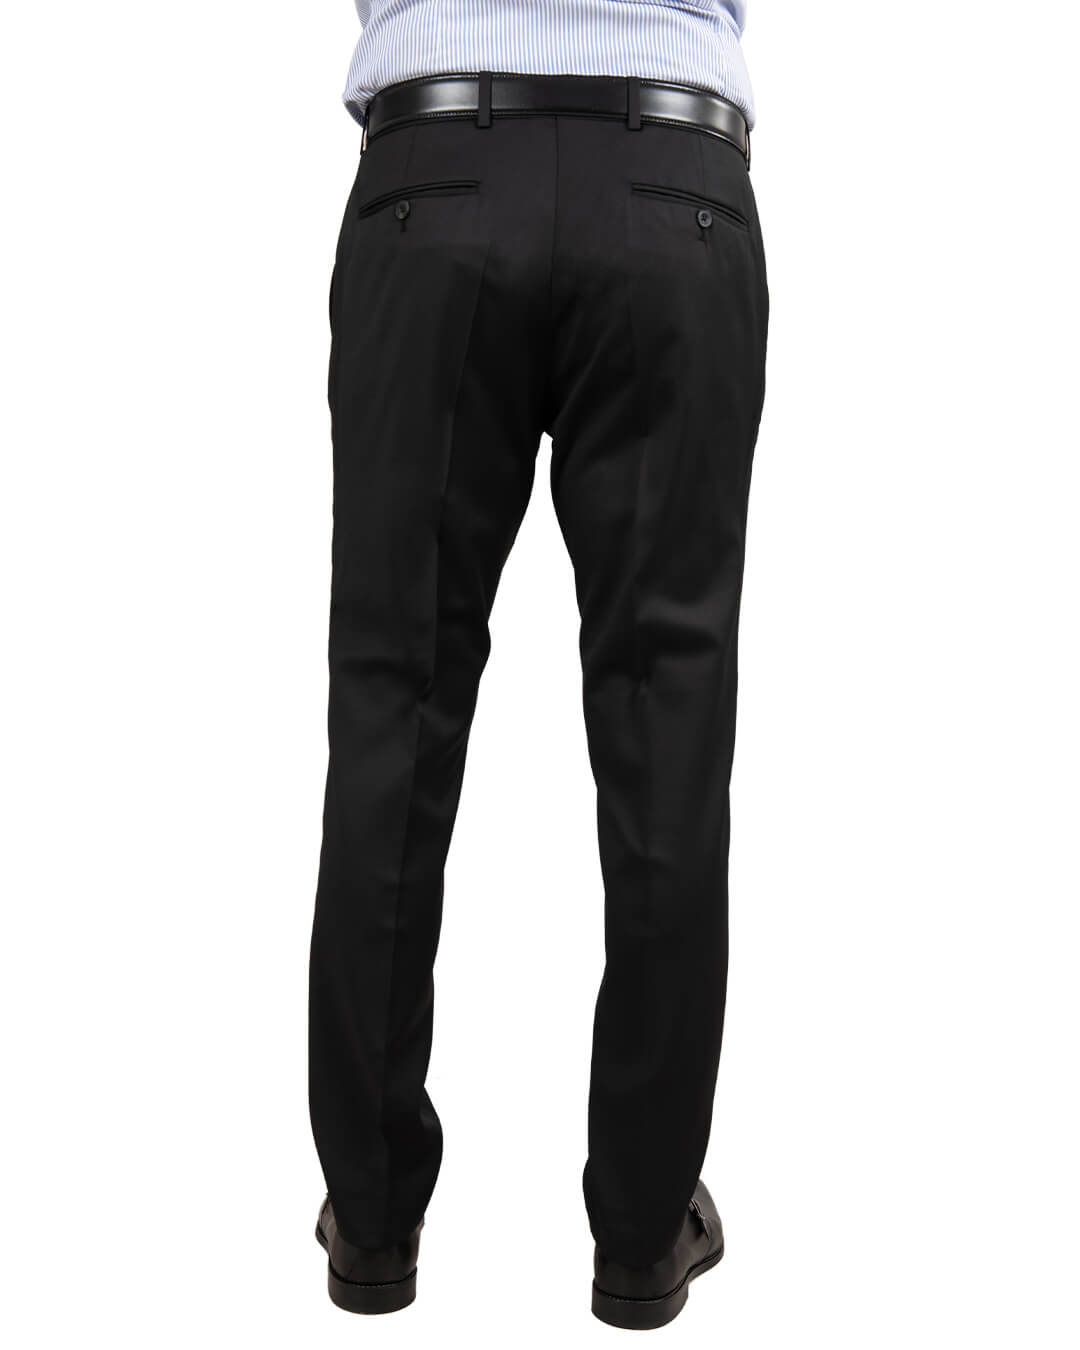 Reda Black Twill Suit Trousers